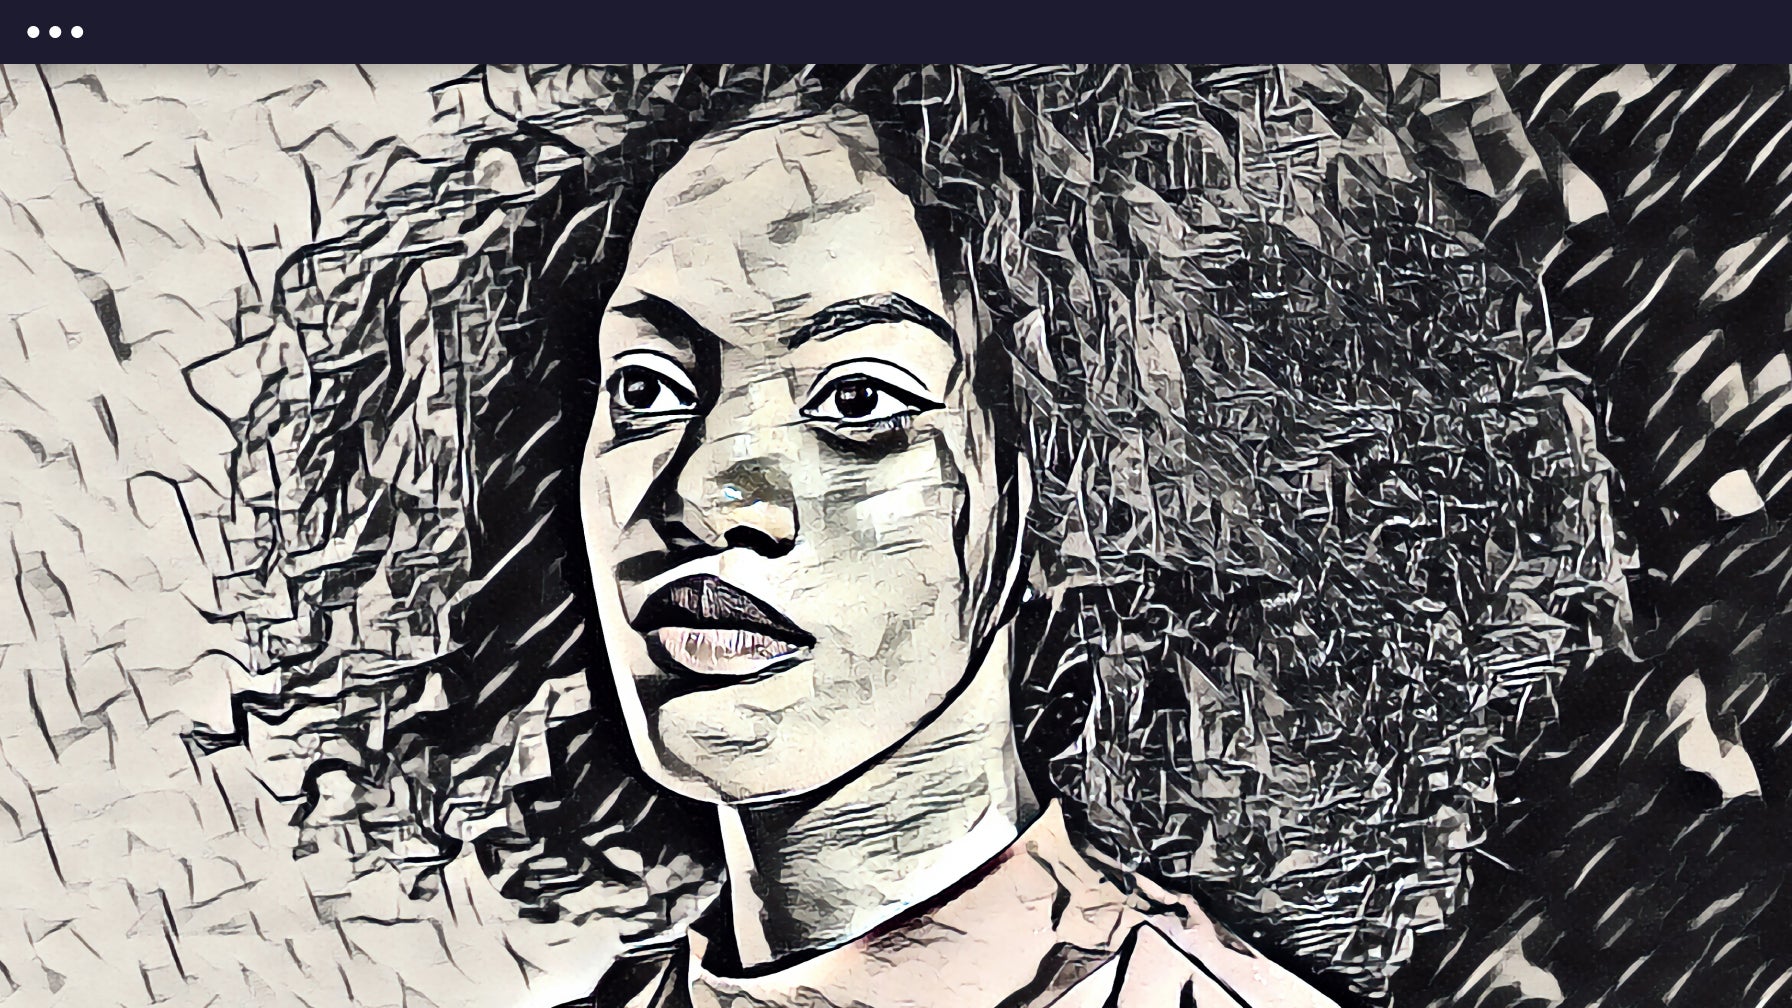 VansPortrait  Turn Photo into Line Drawing with AI to Get Pencil Sketches